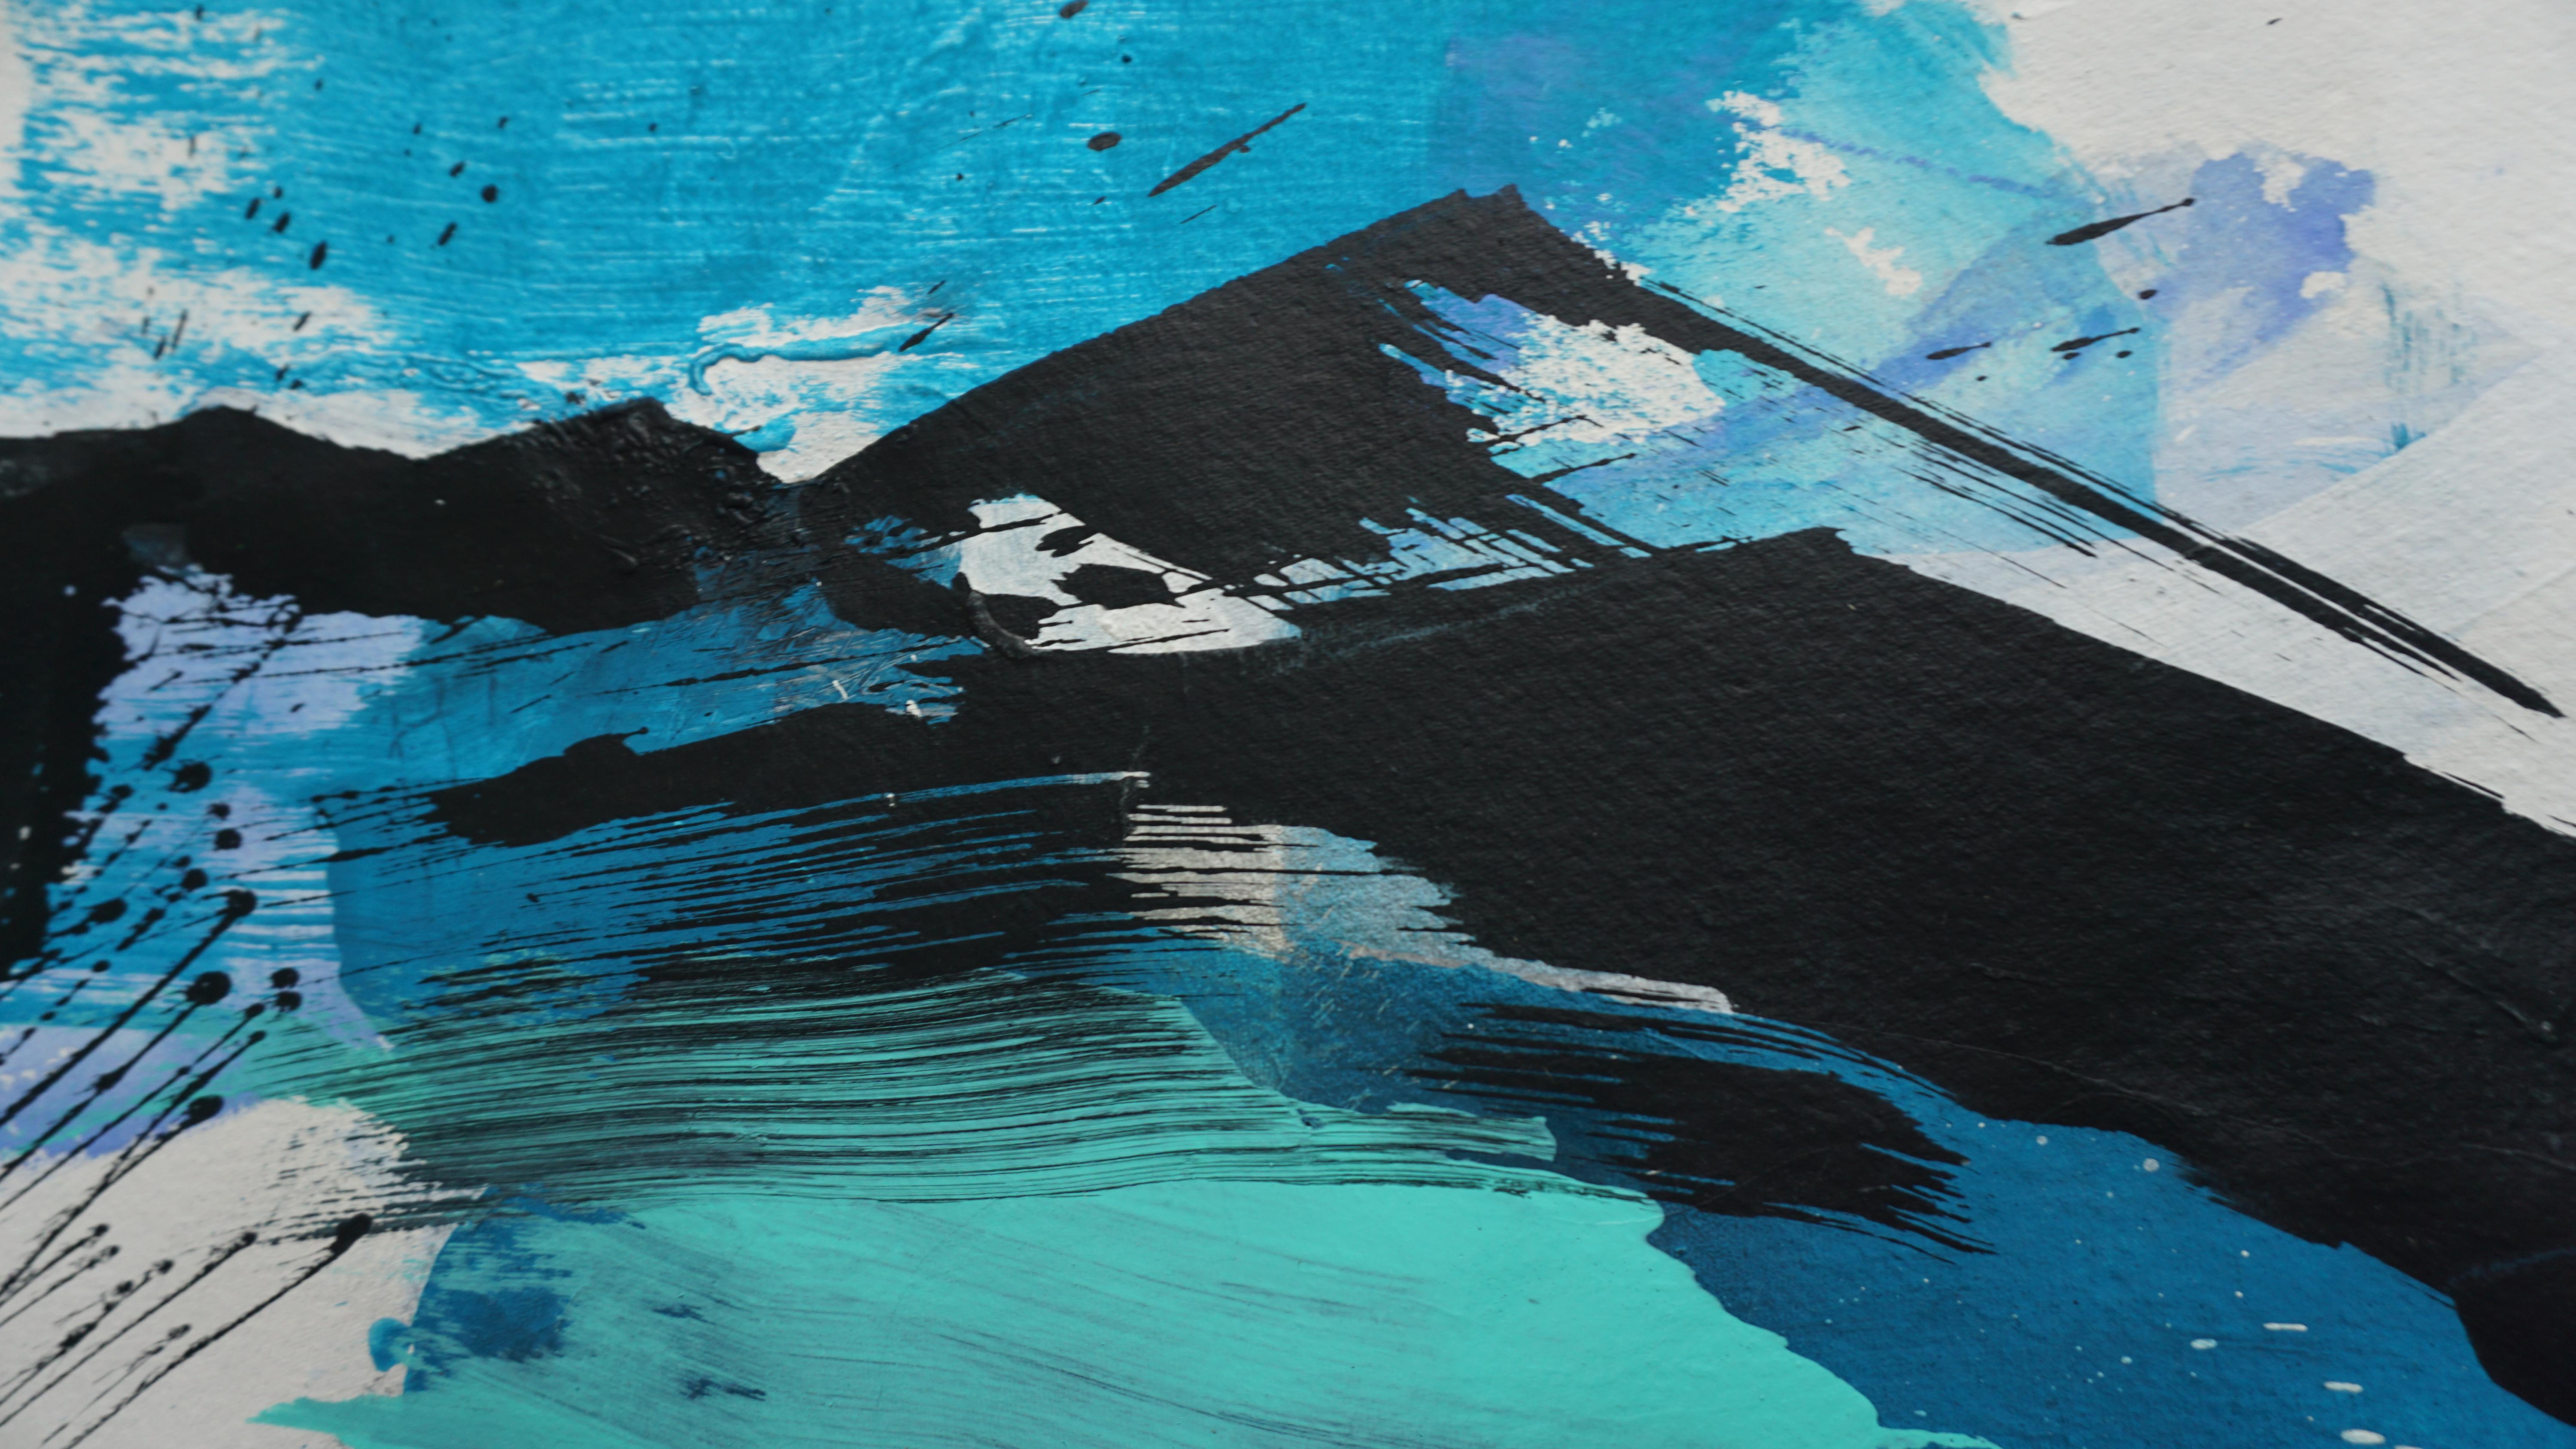 Mountain III - Blue Abstract Painting by Yeo Shih-Yun